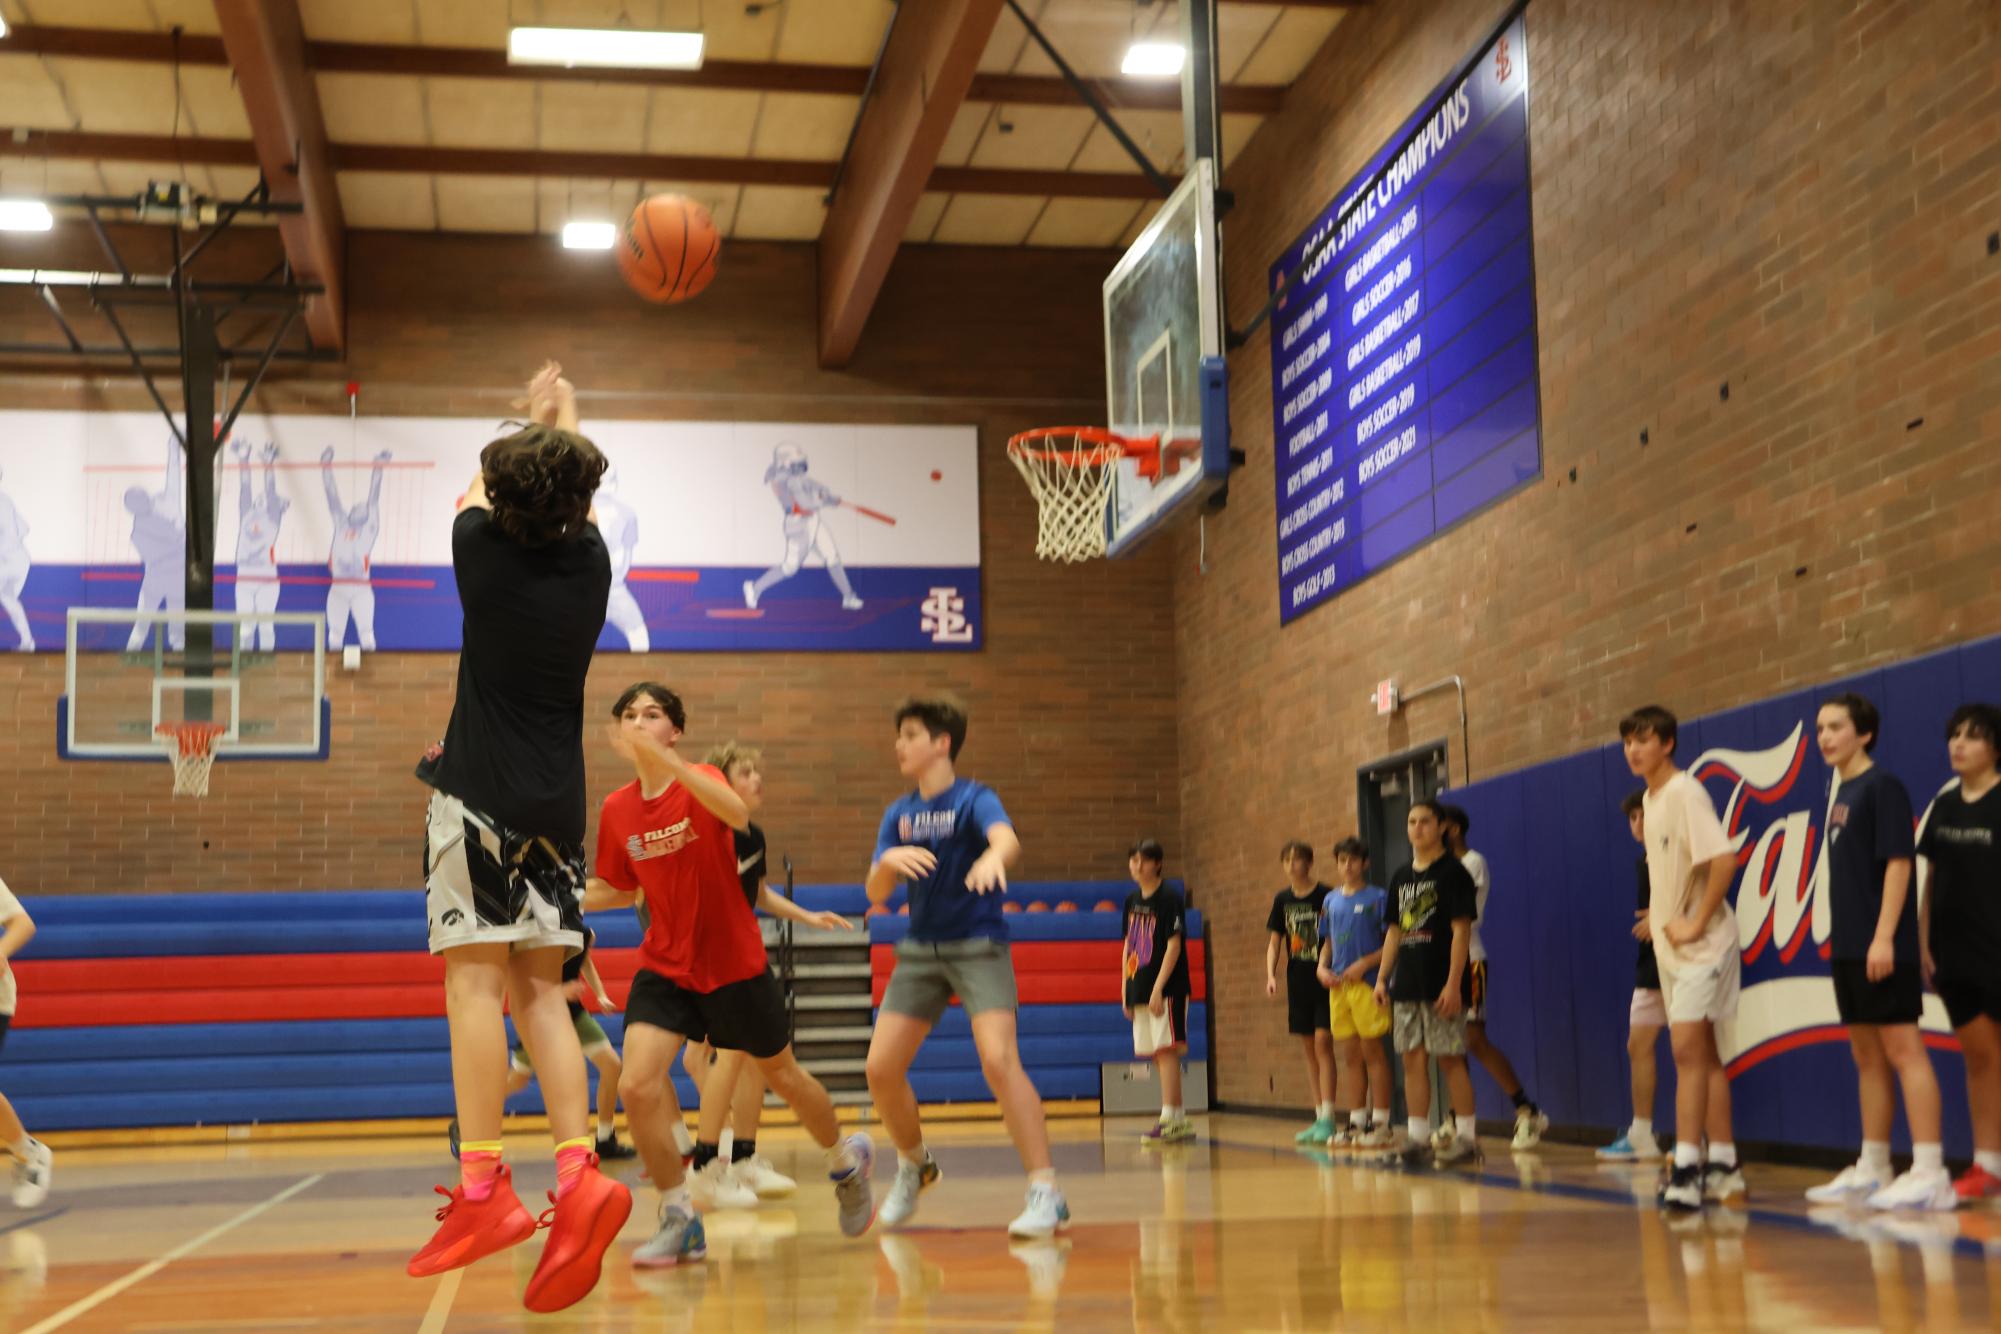 Photo+Story%3A+Girls+and+Boys+Basketball+Tryouts+Set+Stage+for+Season+Ahead